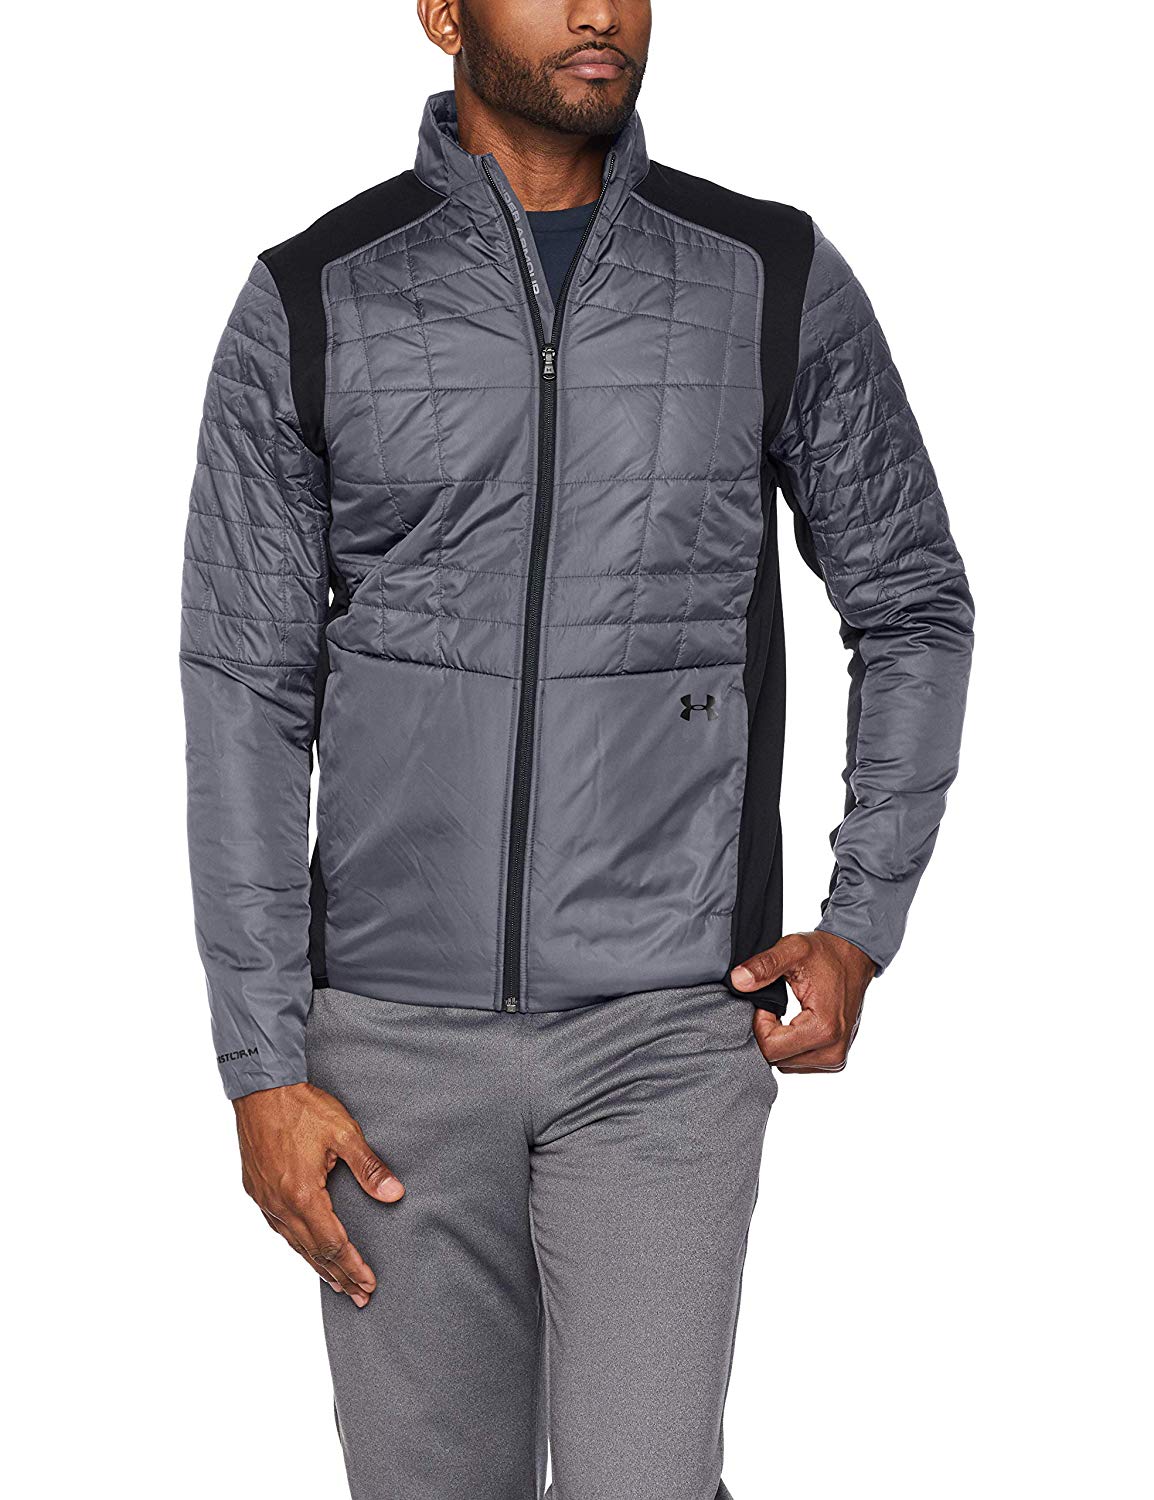 Mens Under Armour Storm Insulated Golf Jackets